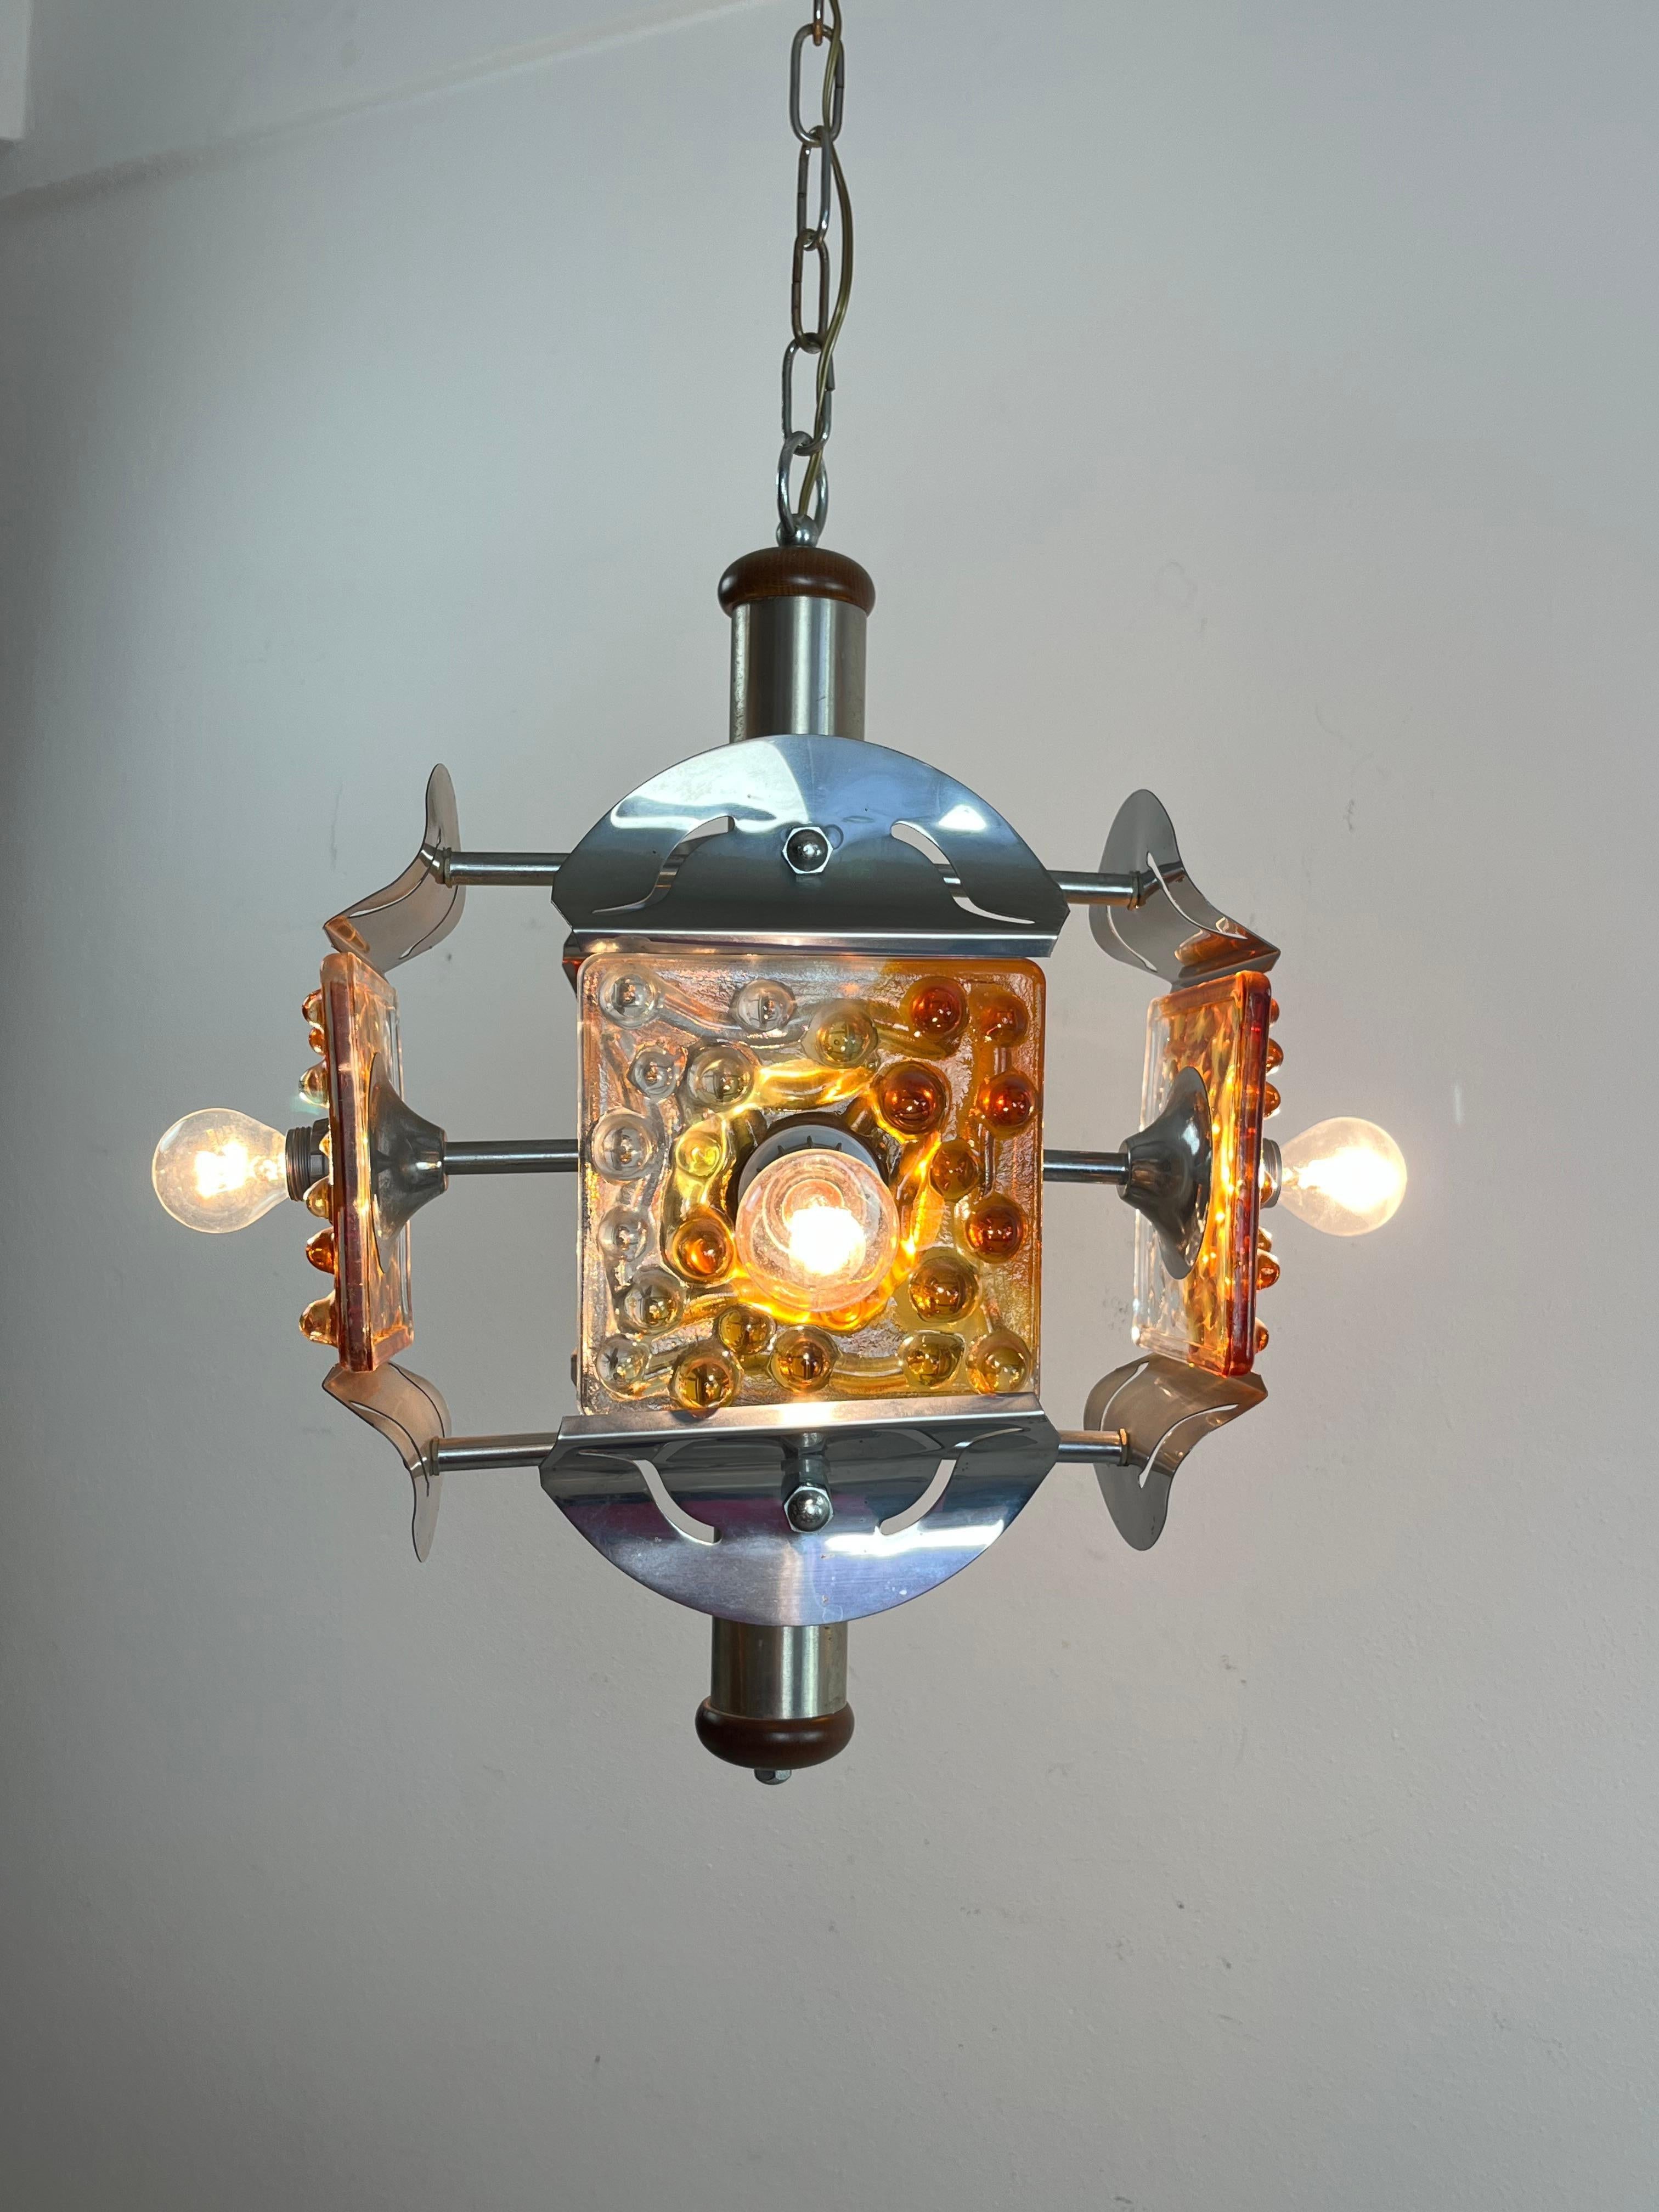 Vintage 4-Light Murano Glass Chandelier Attributed To Mazzega 1970s For Sale 2